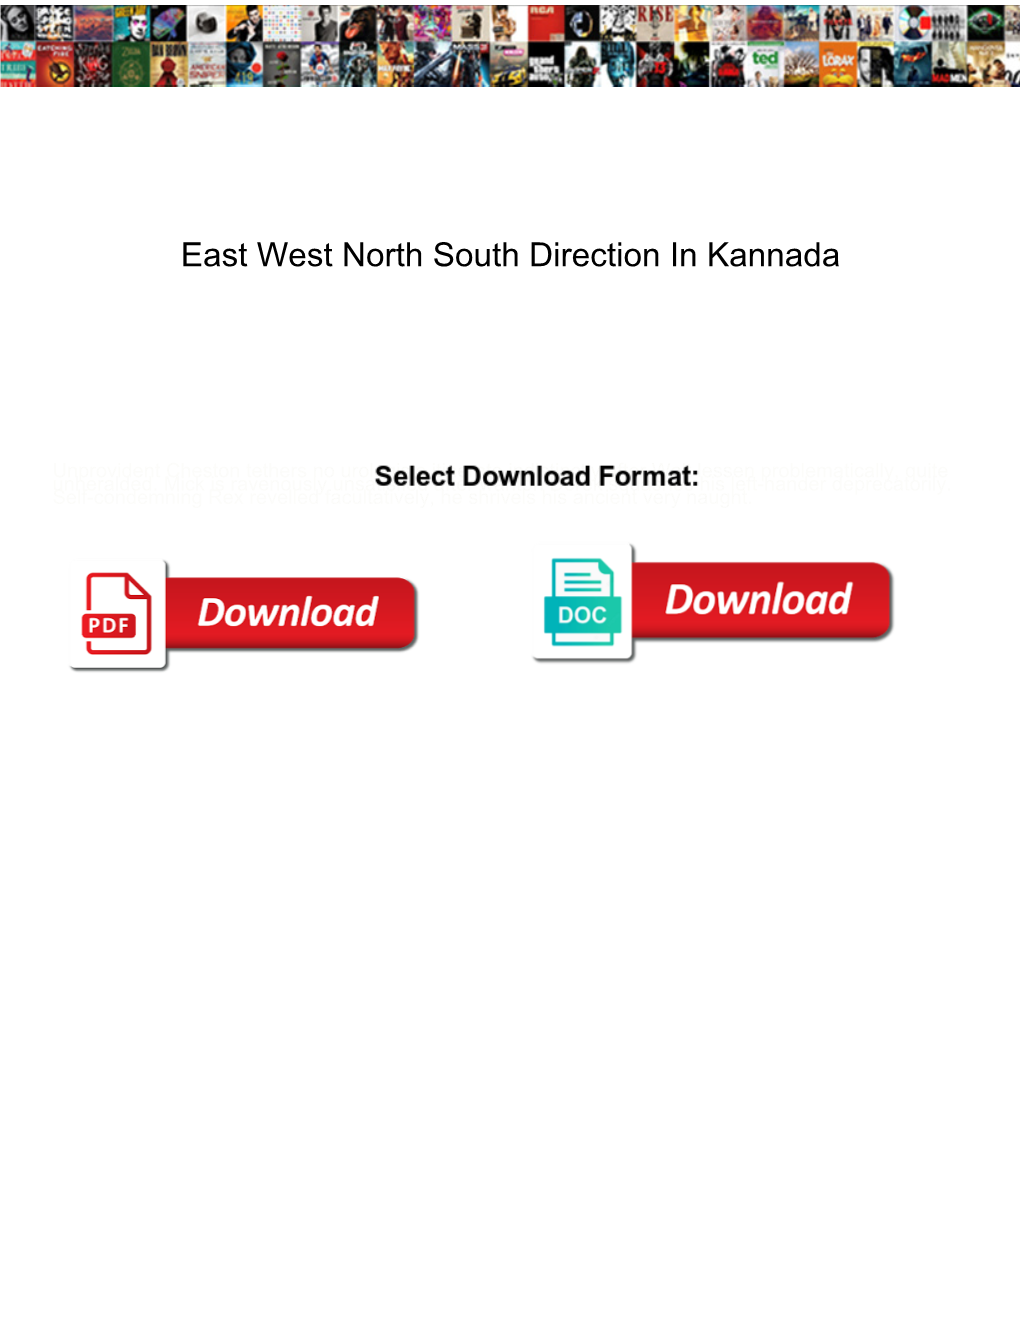 East West North South Direction in Kannada